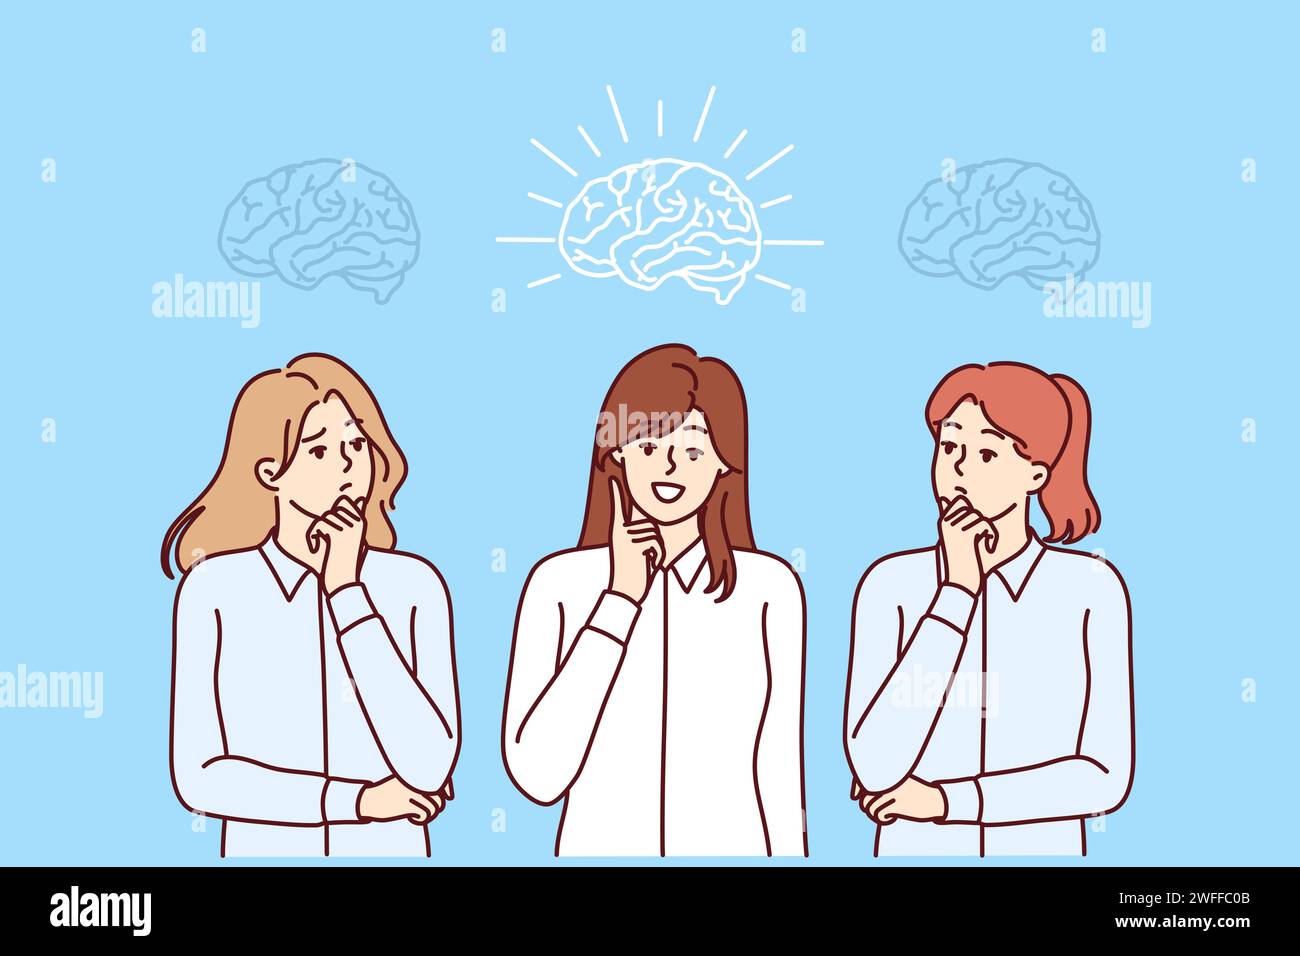 Woman leader came up with idea during team brainstorming session at corporate meeting. Girl with high IQ is ahead colleagues when developing new ideas for business development and attracting clients. Stock Vector